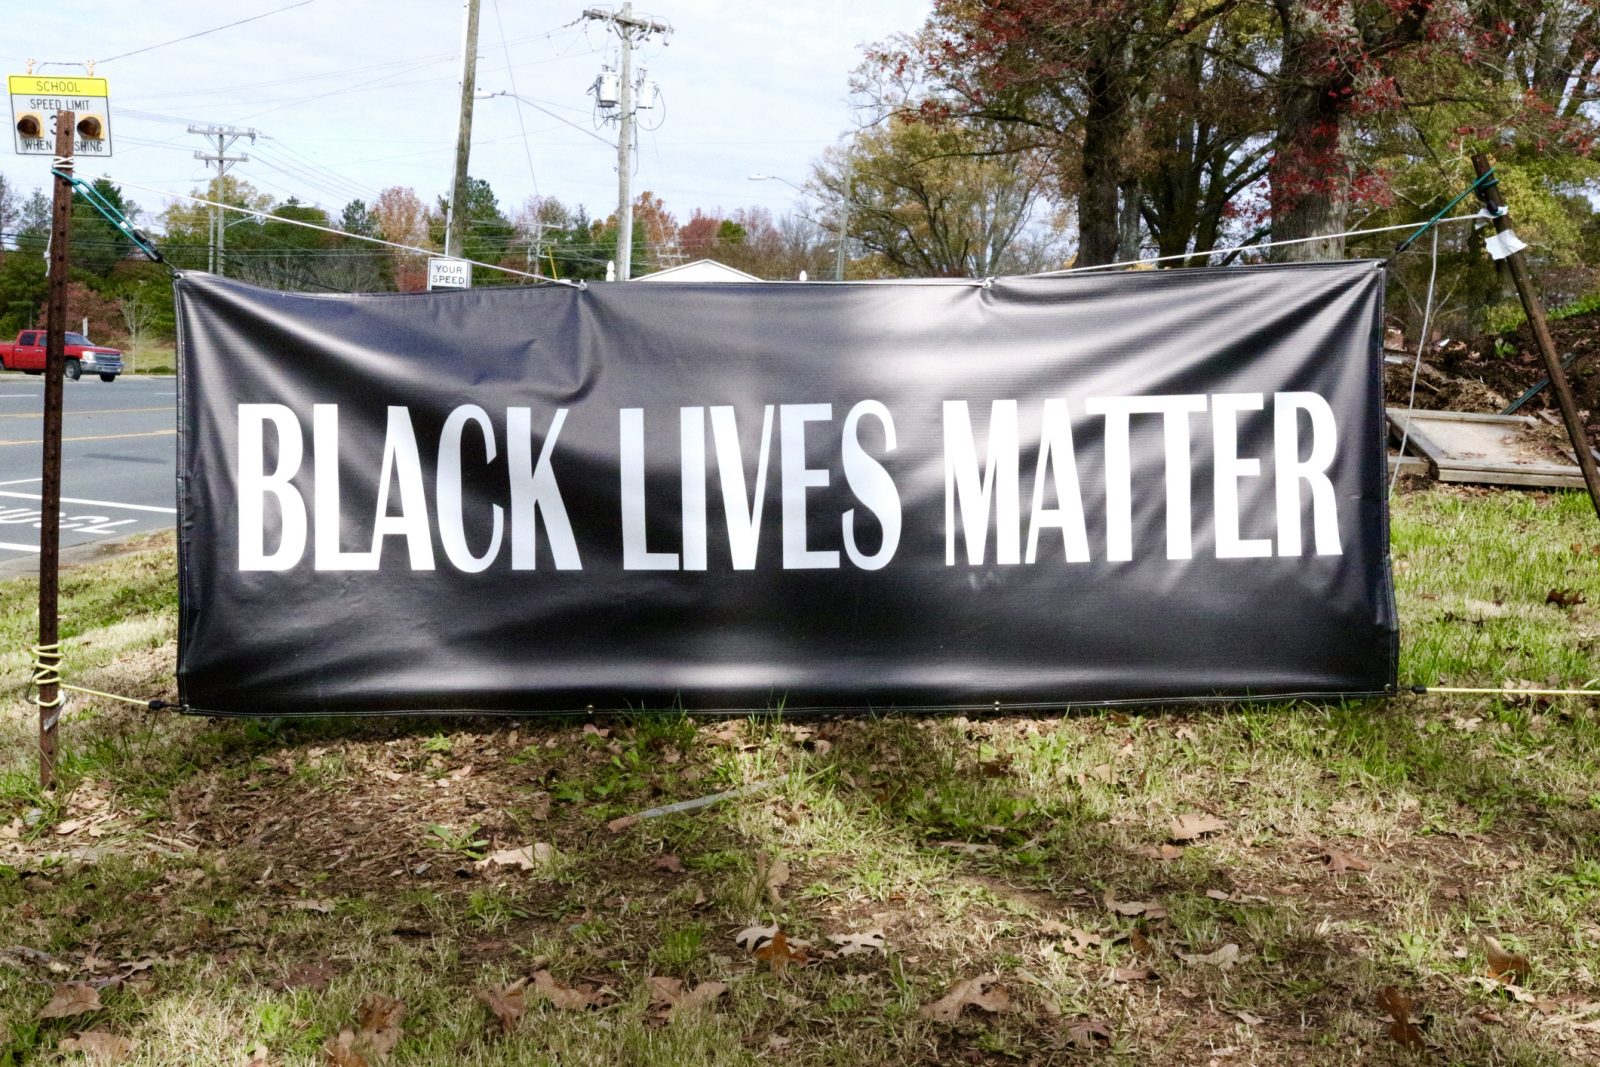 This is a Black Lives Matter Banner in Charlotte, NC, November 2015.